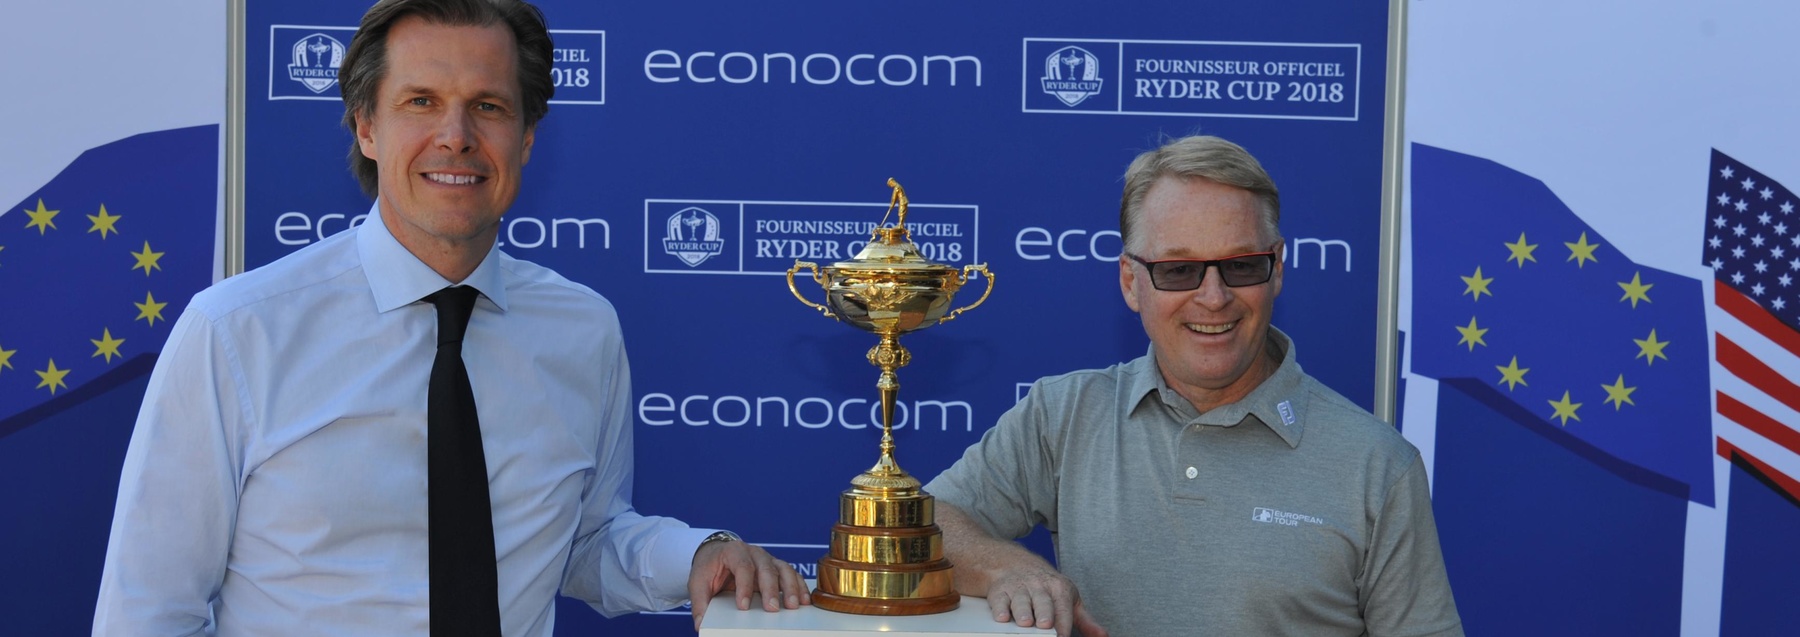 Robert Bouchardcrop, CEO and Keith Pelley, CEO of European Tour